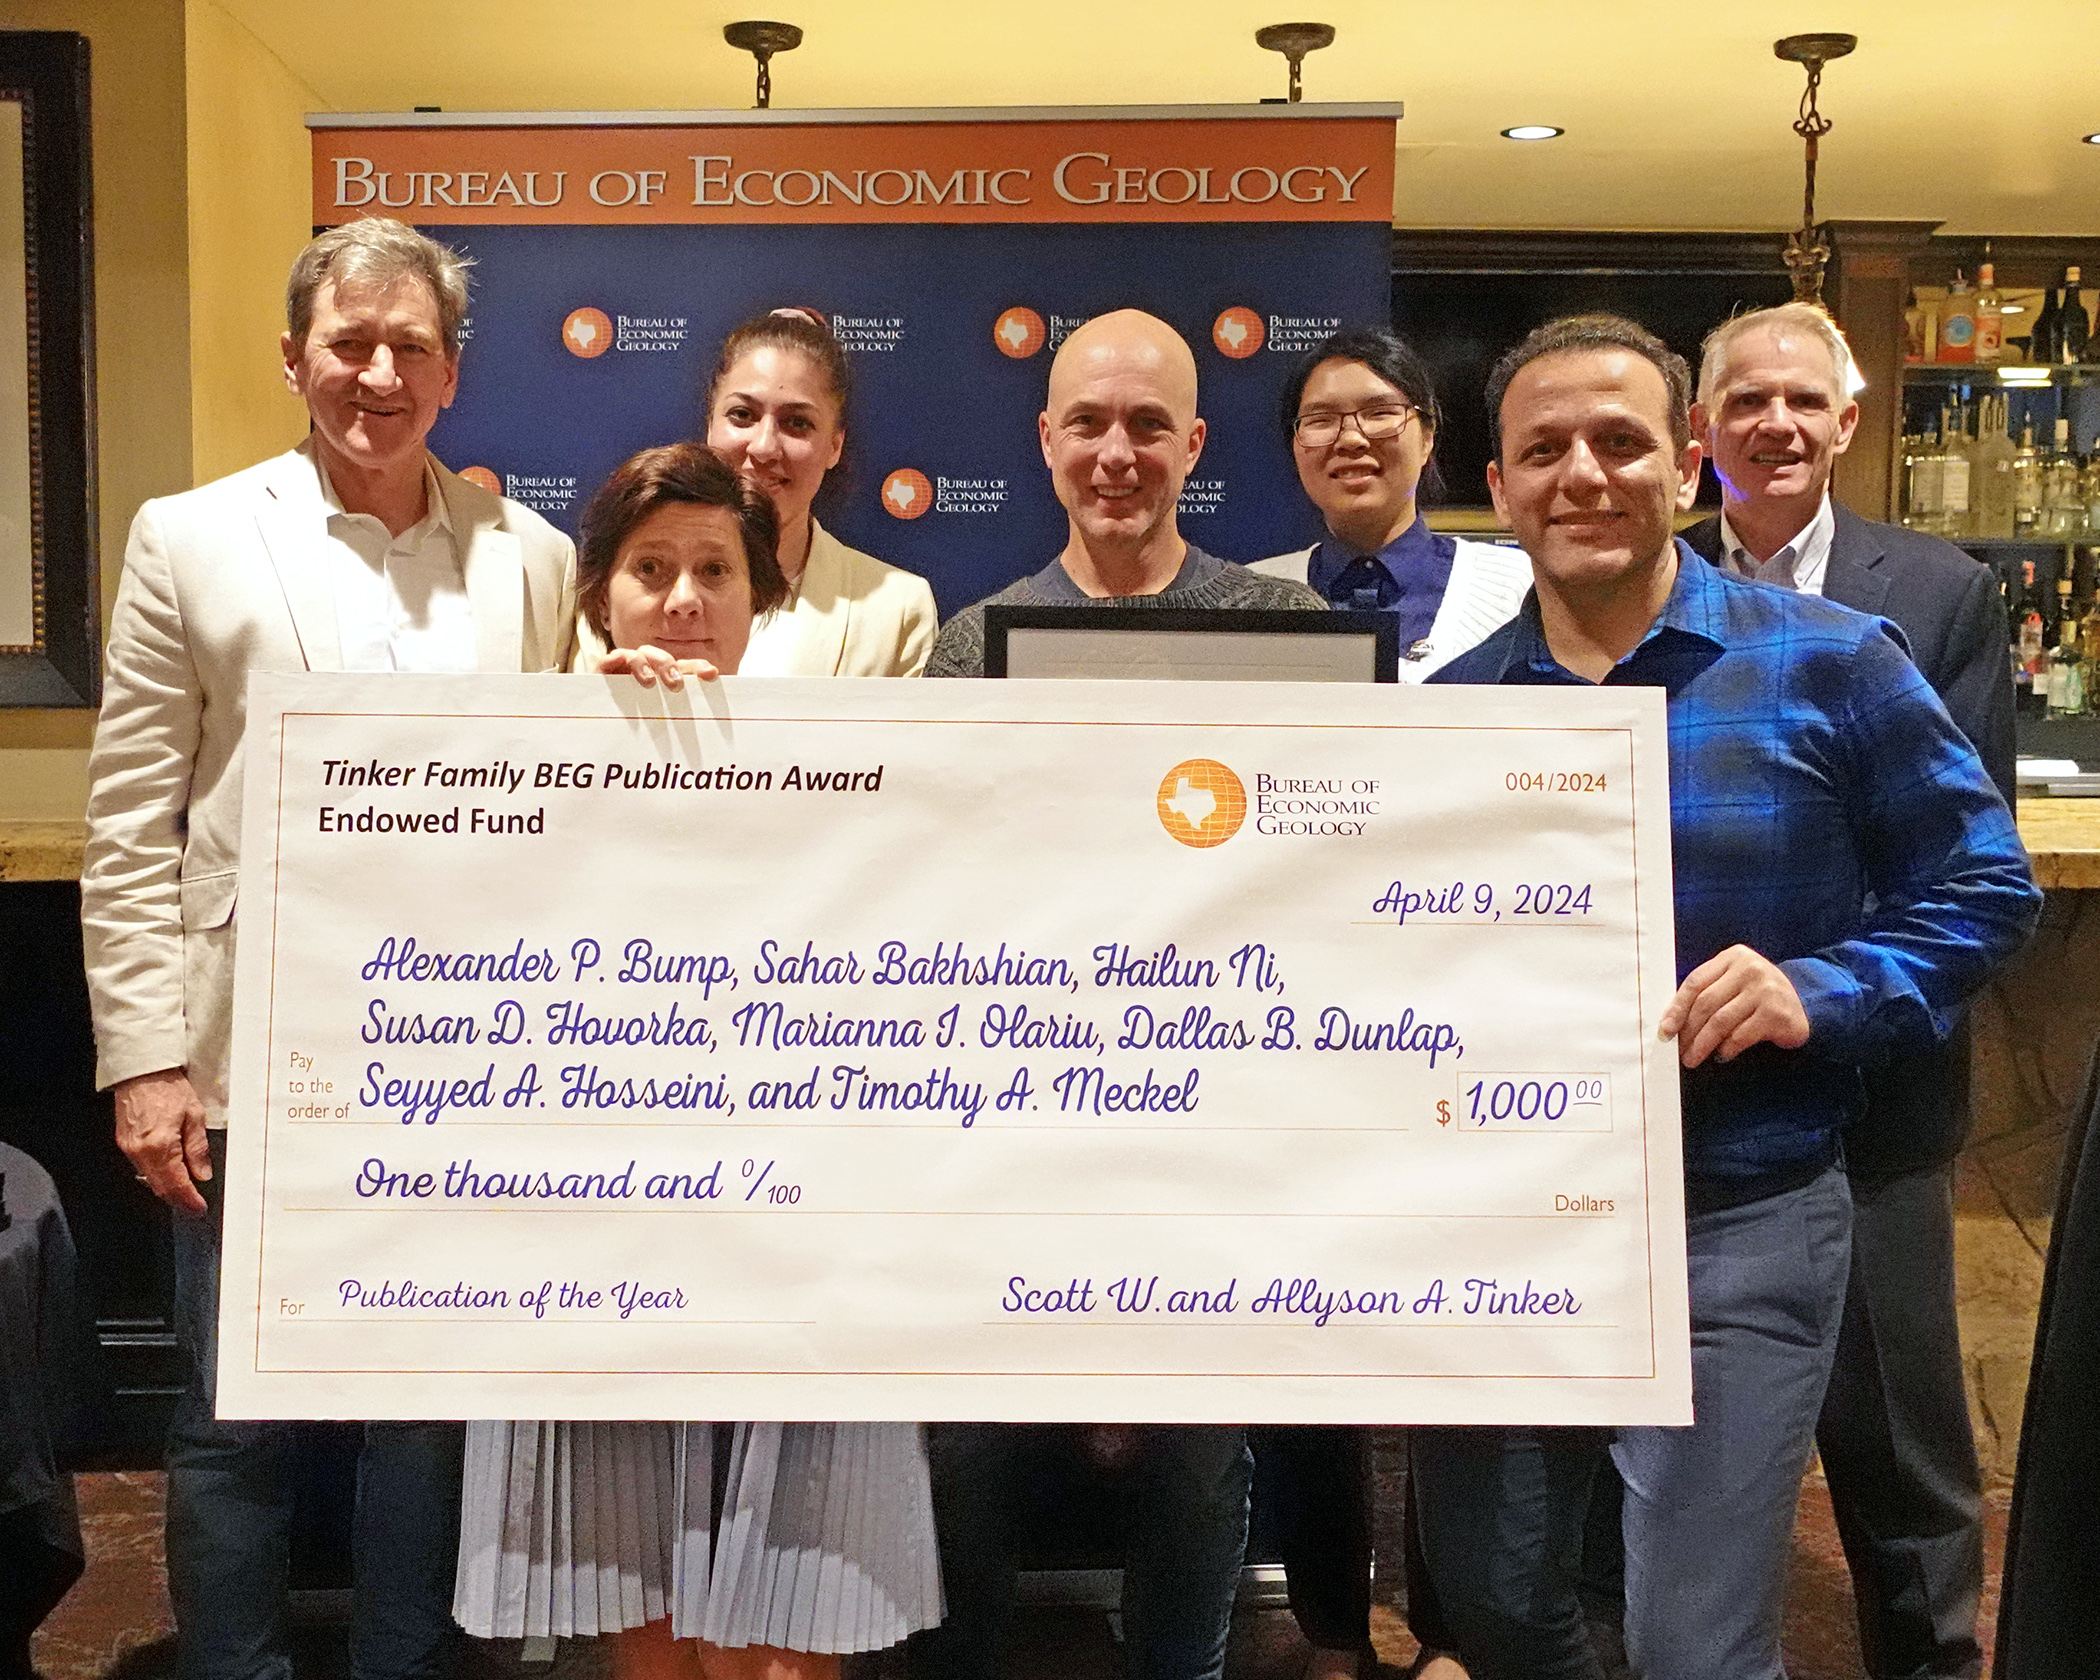 Two presenters and five research award recipients pose for a photo with a large check for $1000 in front of a "Bureau of Economic Geology" patterned step-and-repeat.